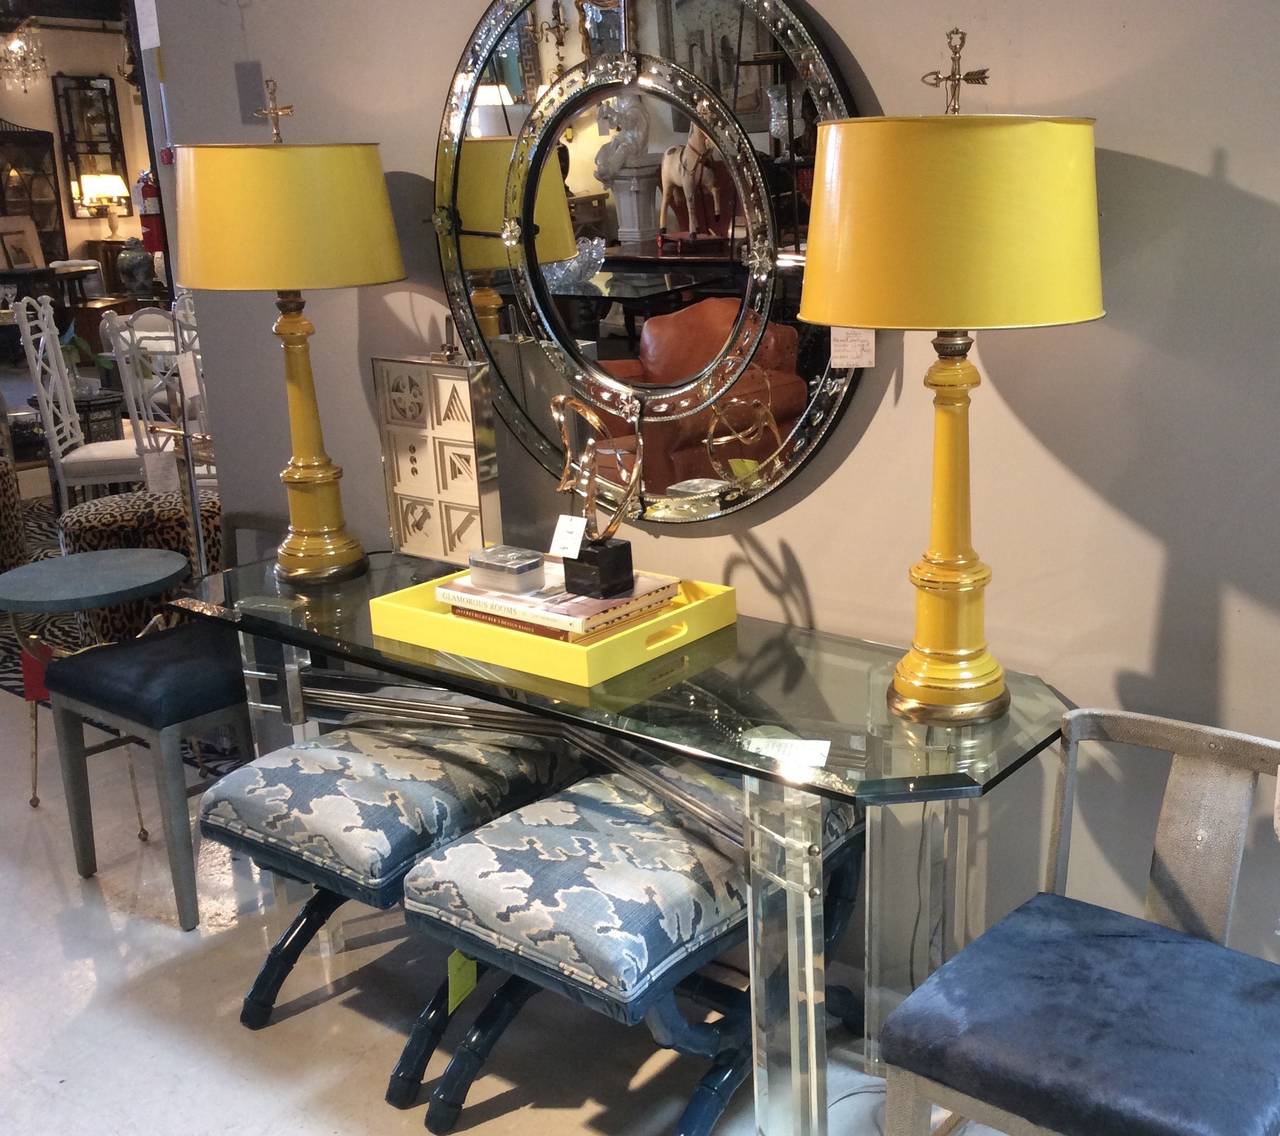 Vibrant and striking yellow pair of table lamps by Warren Kessler of New York. Reverse painted yellow glass body with gilt pinstripe detail. Brass base, stem, arrow finial and amazing colored coordinating shade with gold trimmed rolled edge